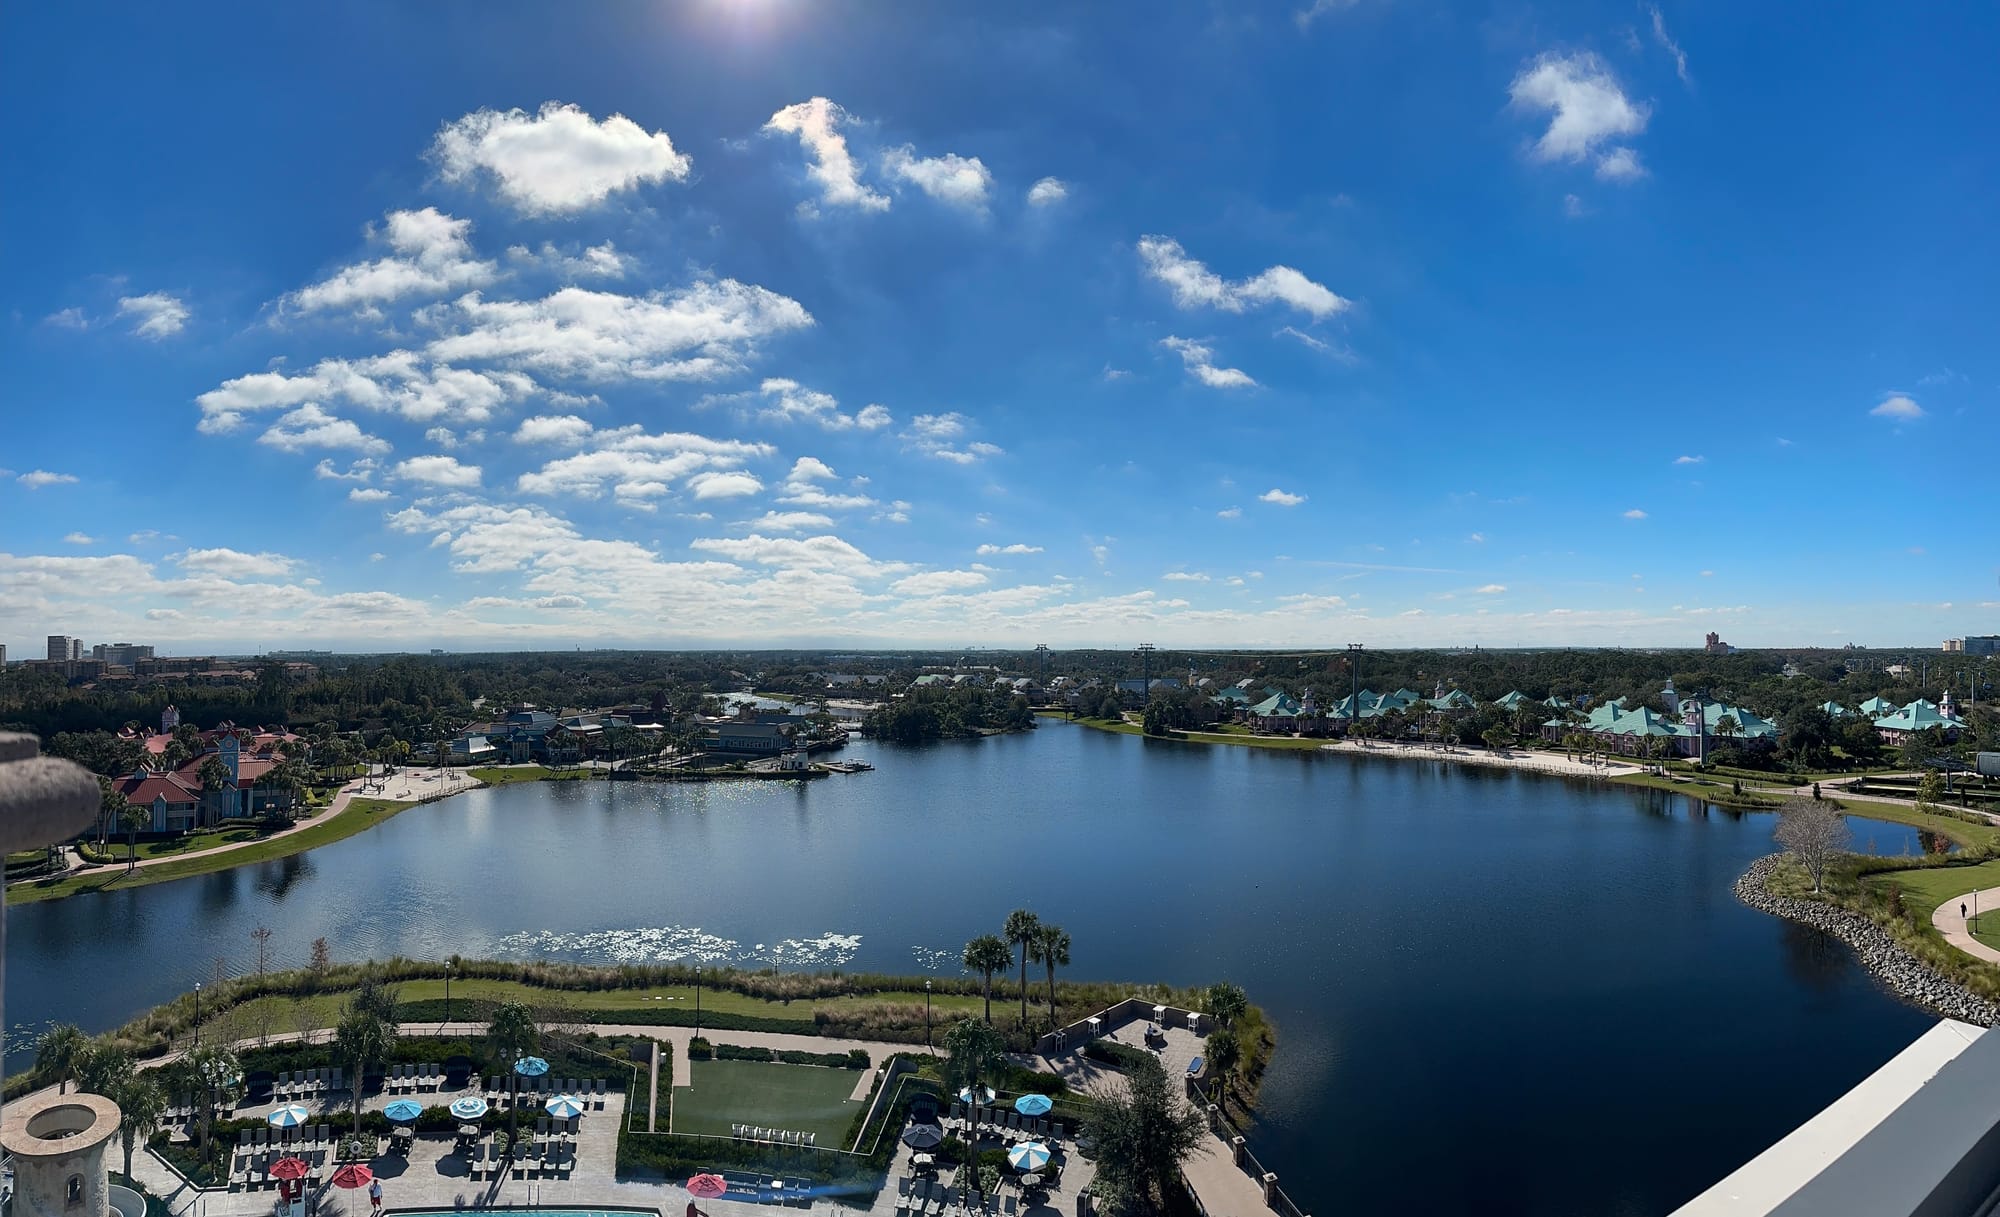 Reasons why you should stay at Disney's Riviera Resort